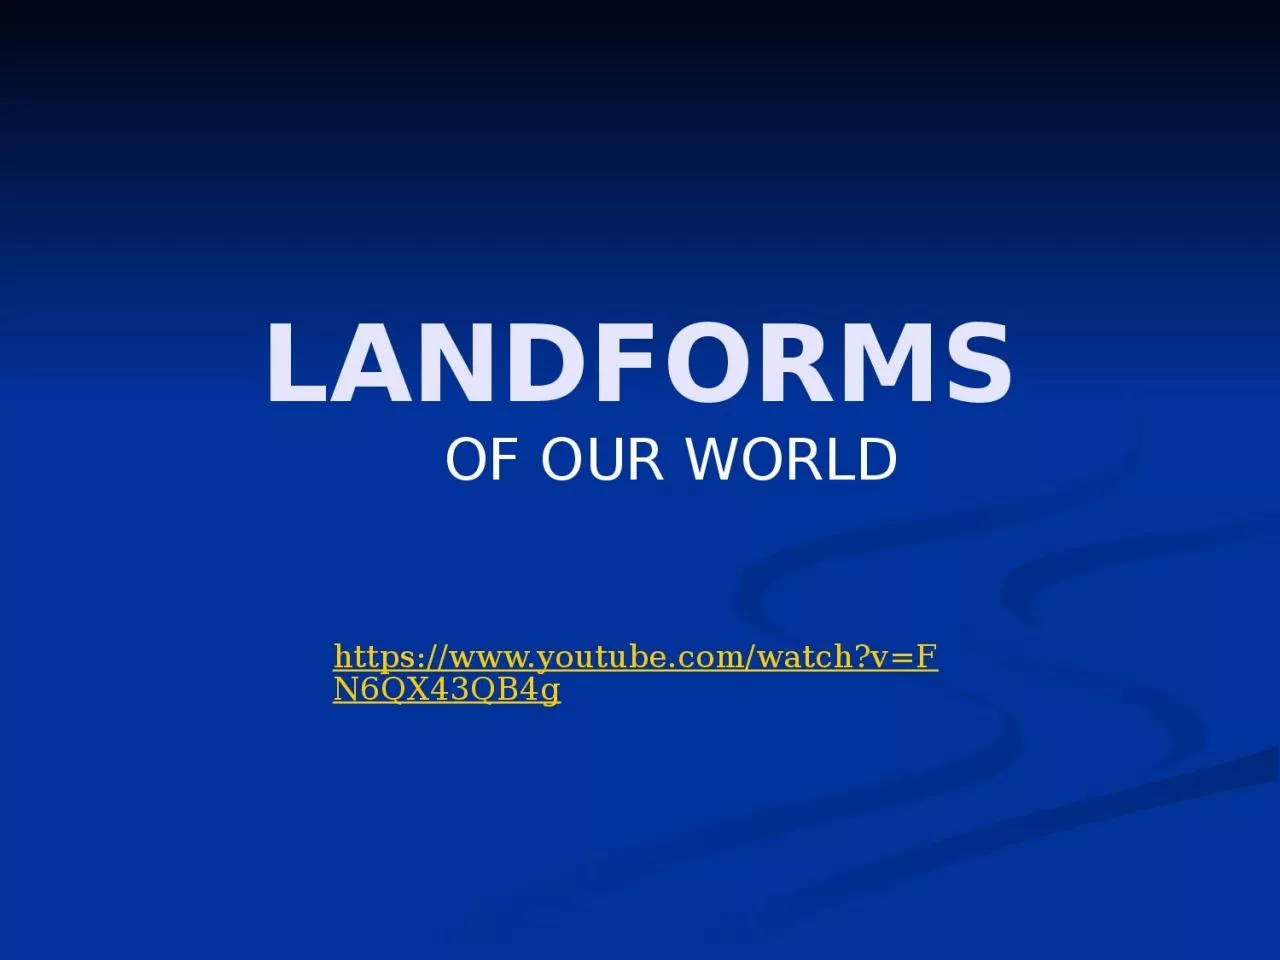 LANDFORMS OF OUR WORLD